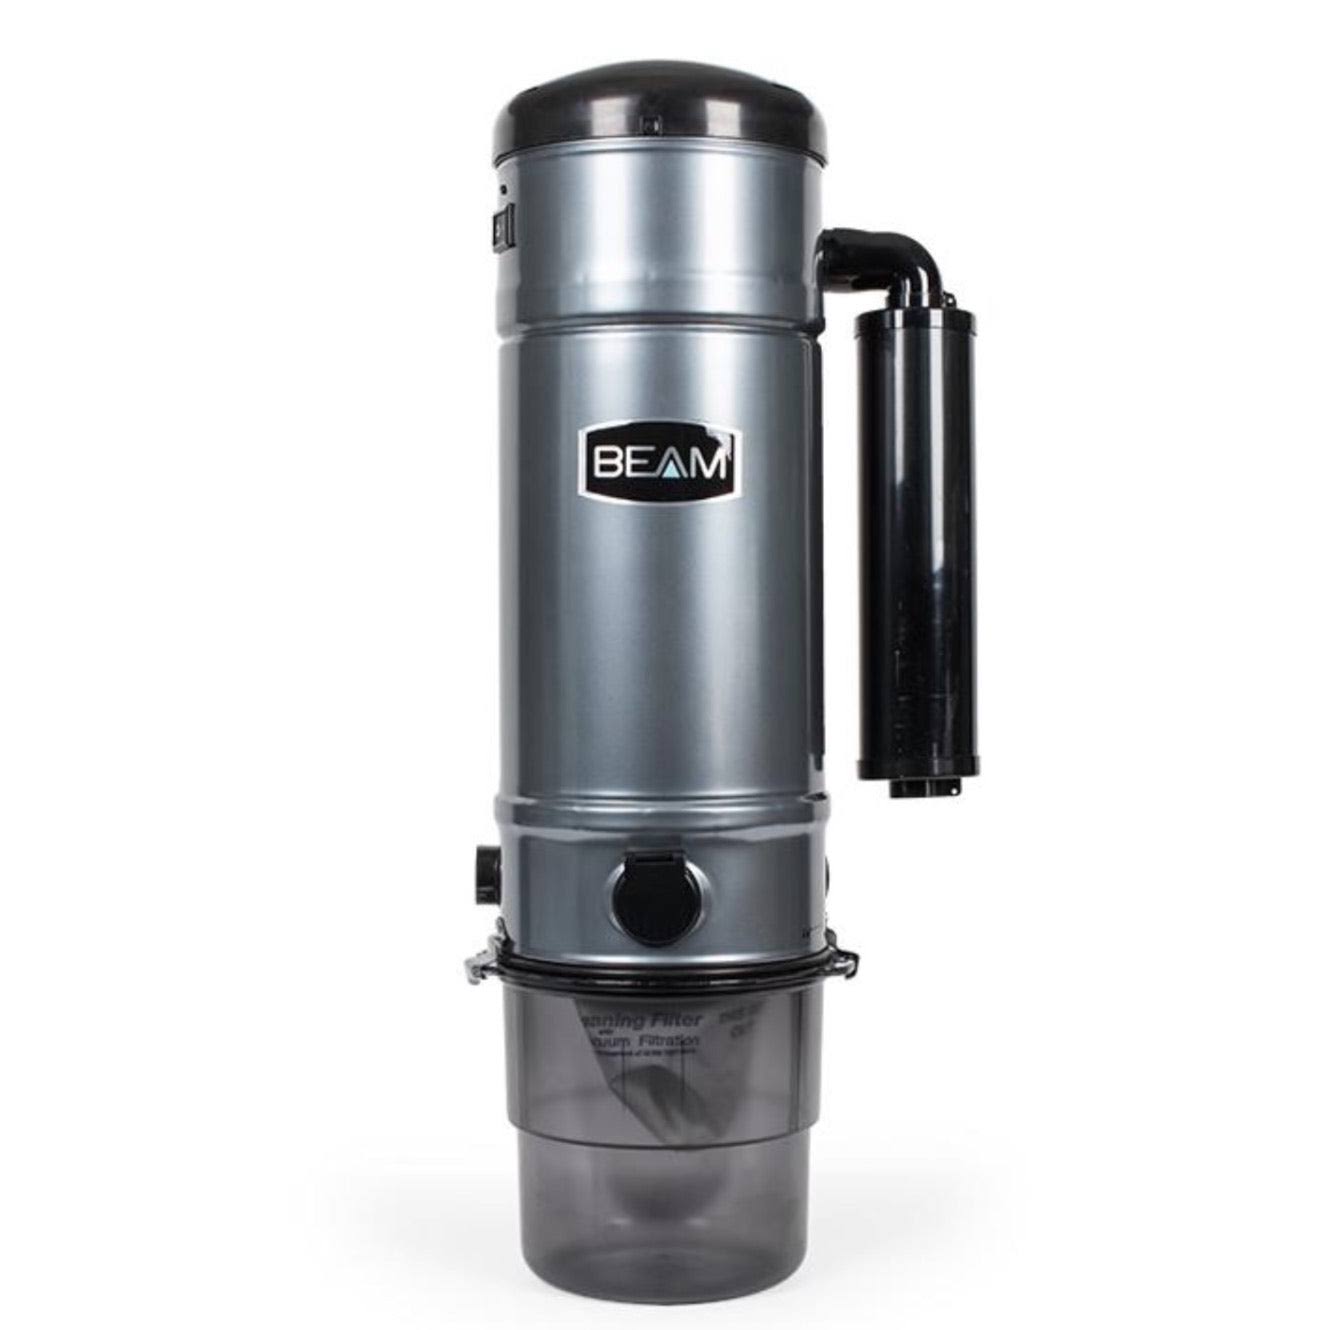 Beam Serenity QS 375A Central Vacuum System